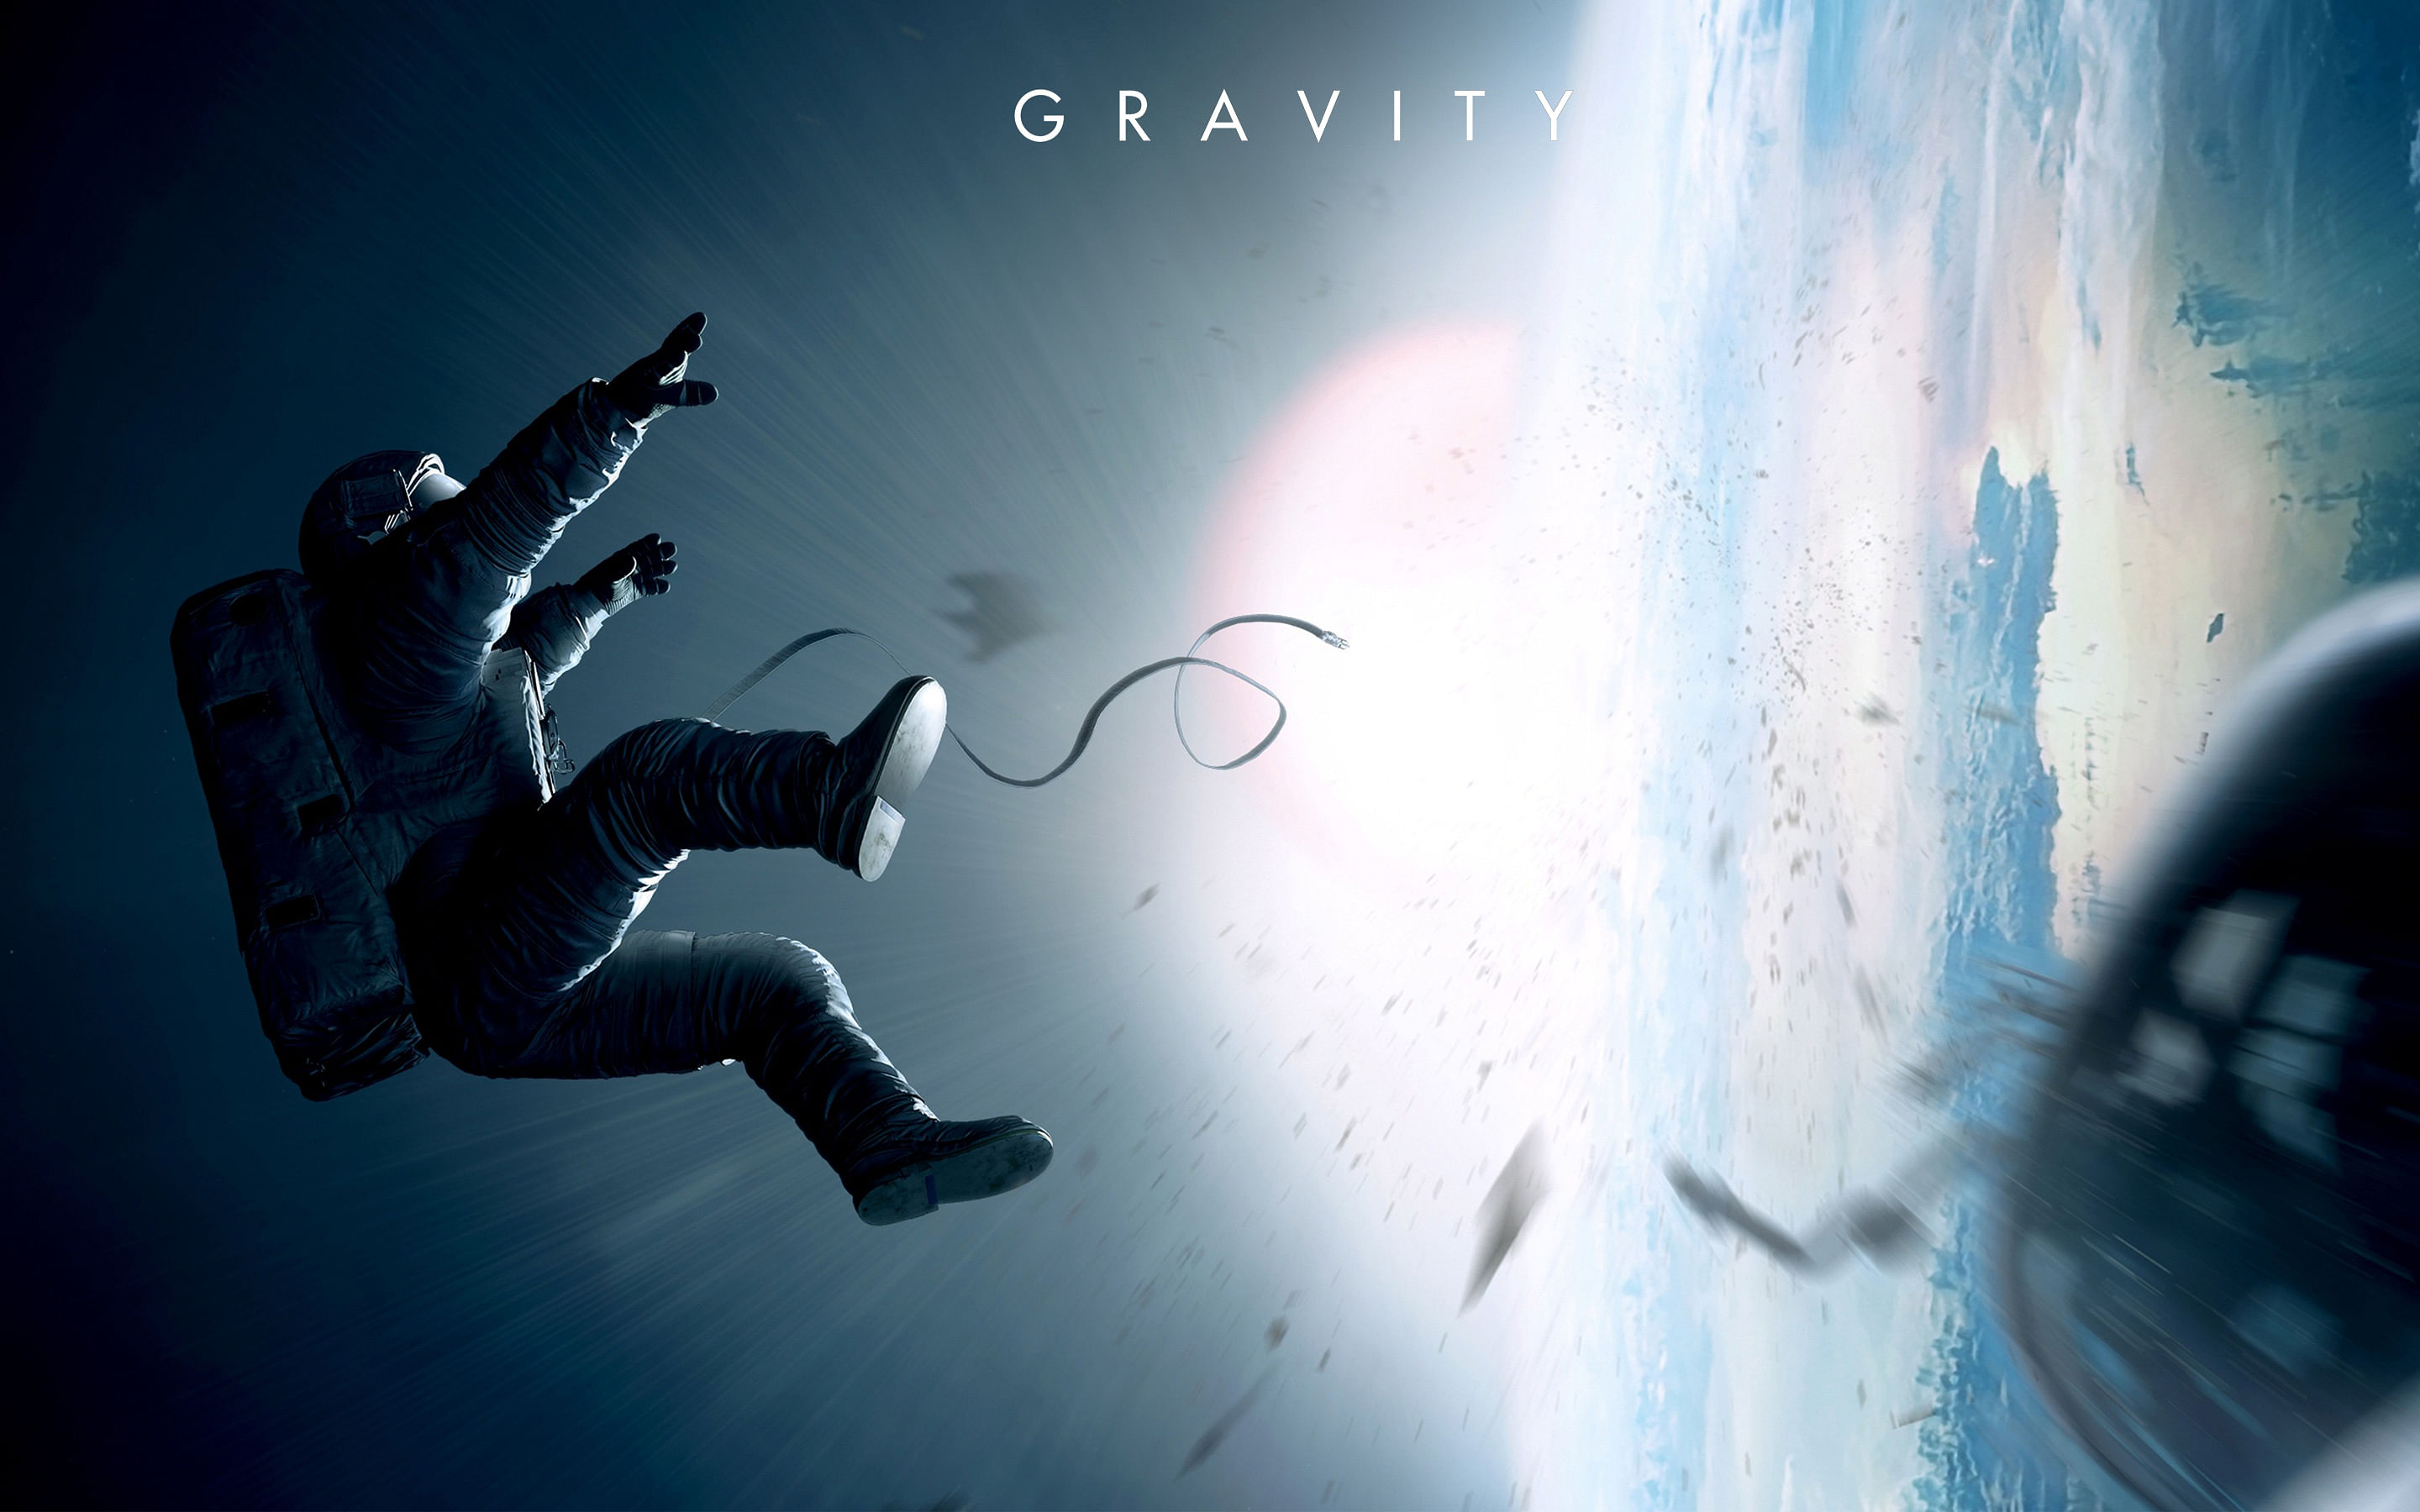 'Gravity', 'Hobbit' in VFX Oscar race with 8 other films